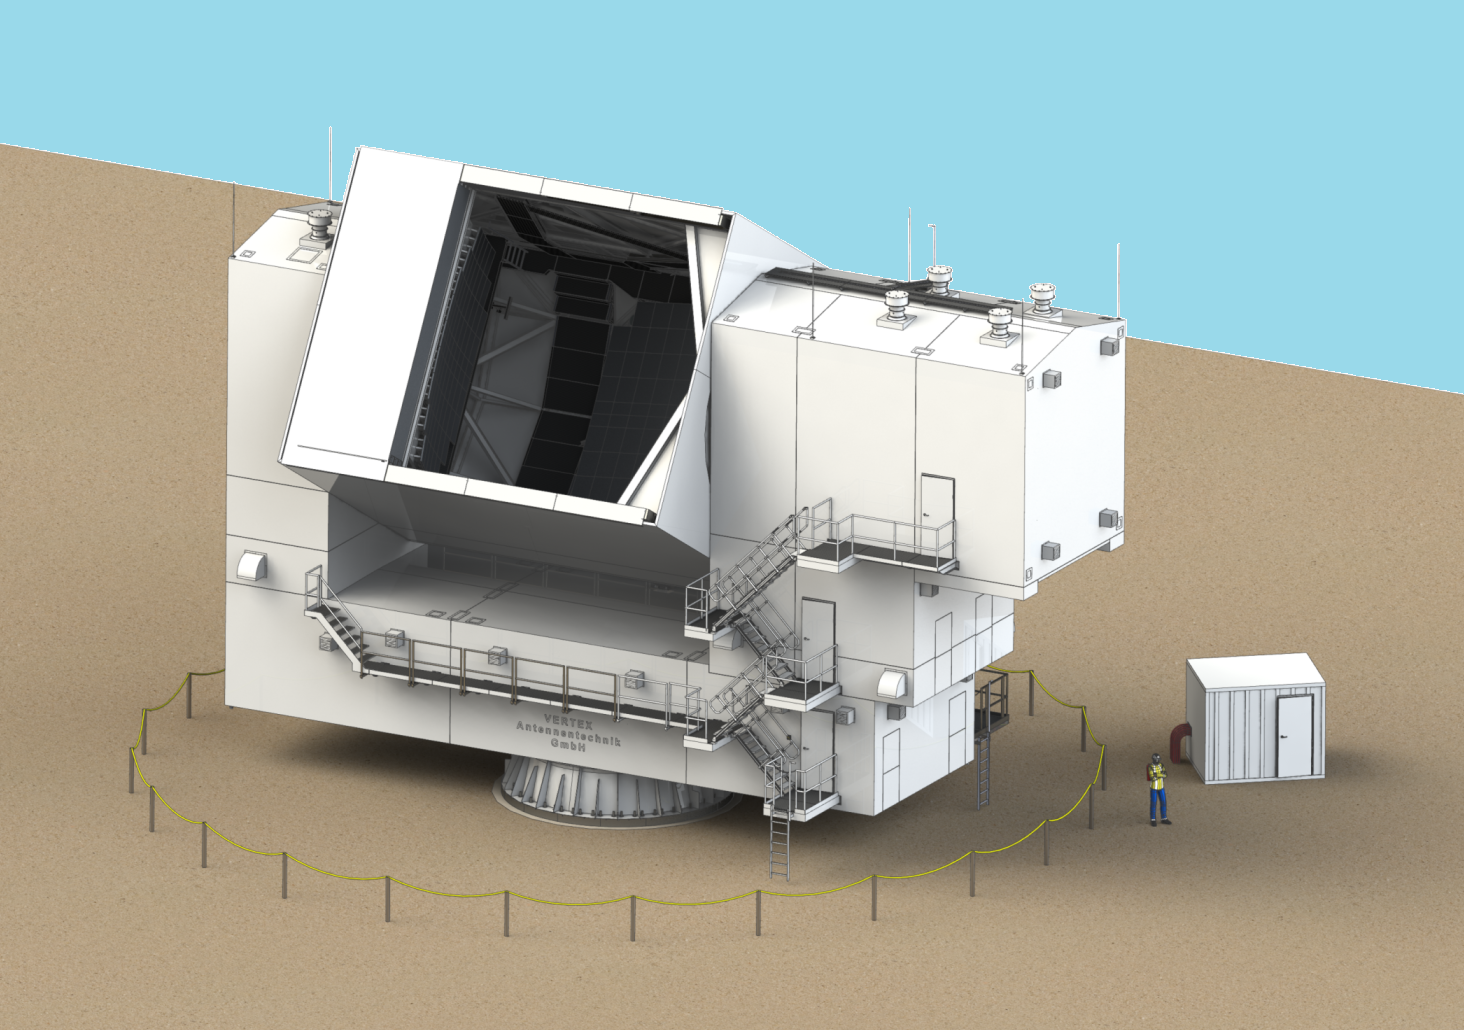 Rendering of the Fred Young Submillimeter Telescope. Credit: CPI Vertex Antennentechnik GmbH